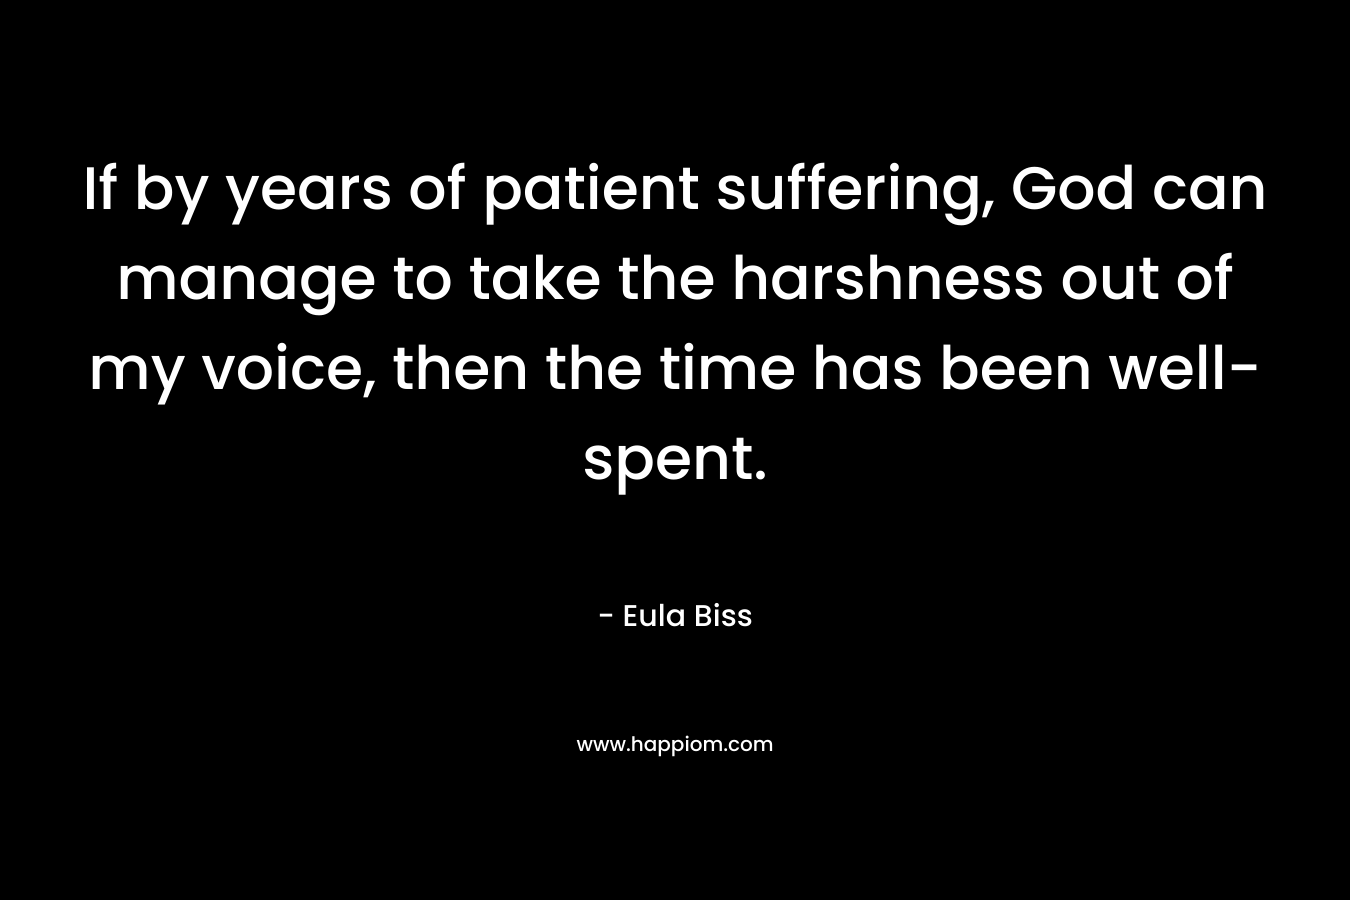 If by years of patient suffering, God can manage to take the harshness out of my voice, then the time has been well-spent. – Eula Biss